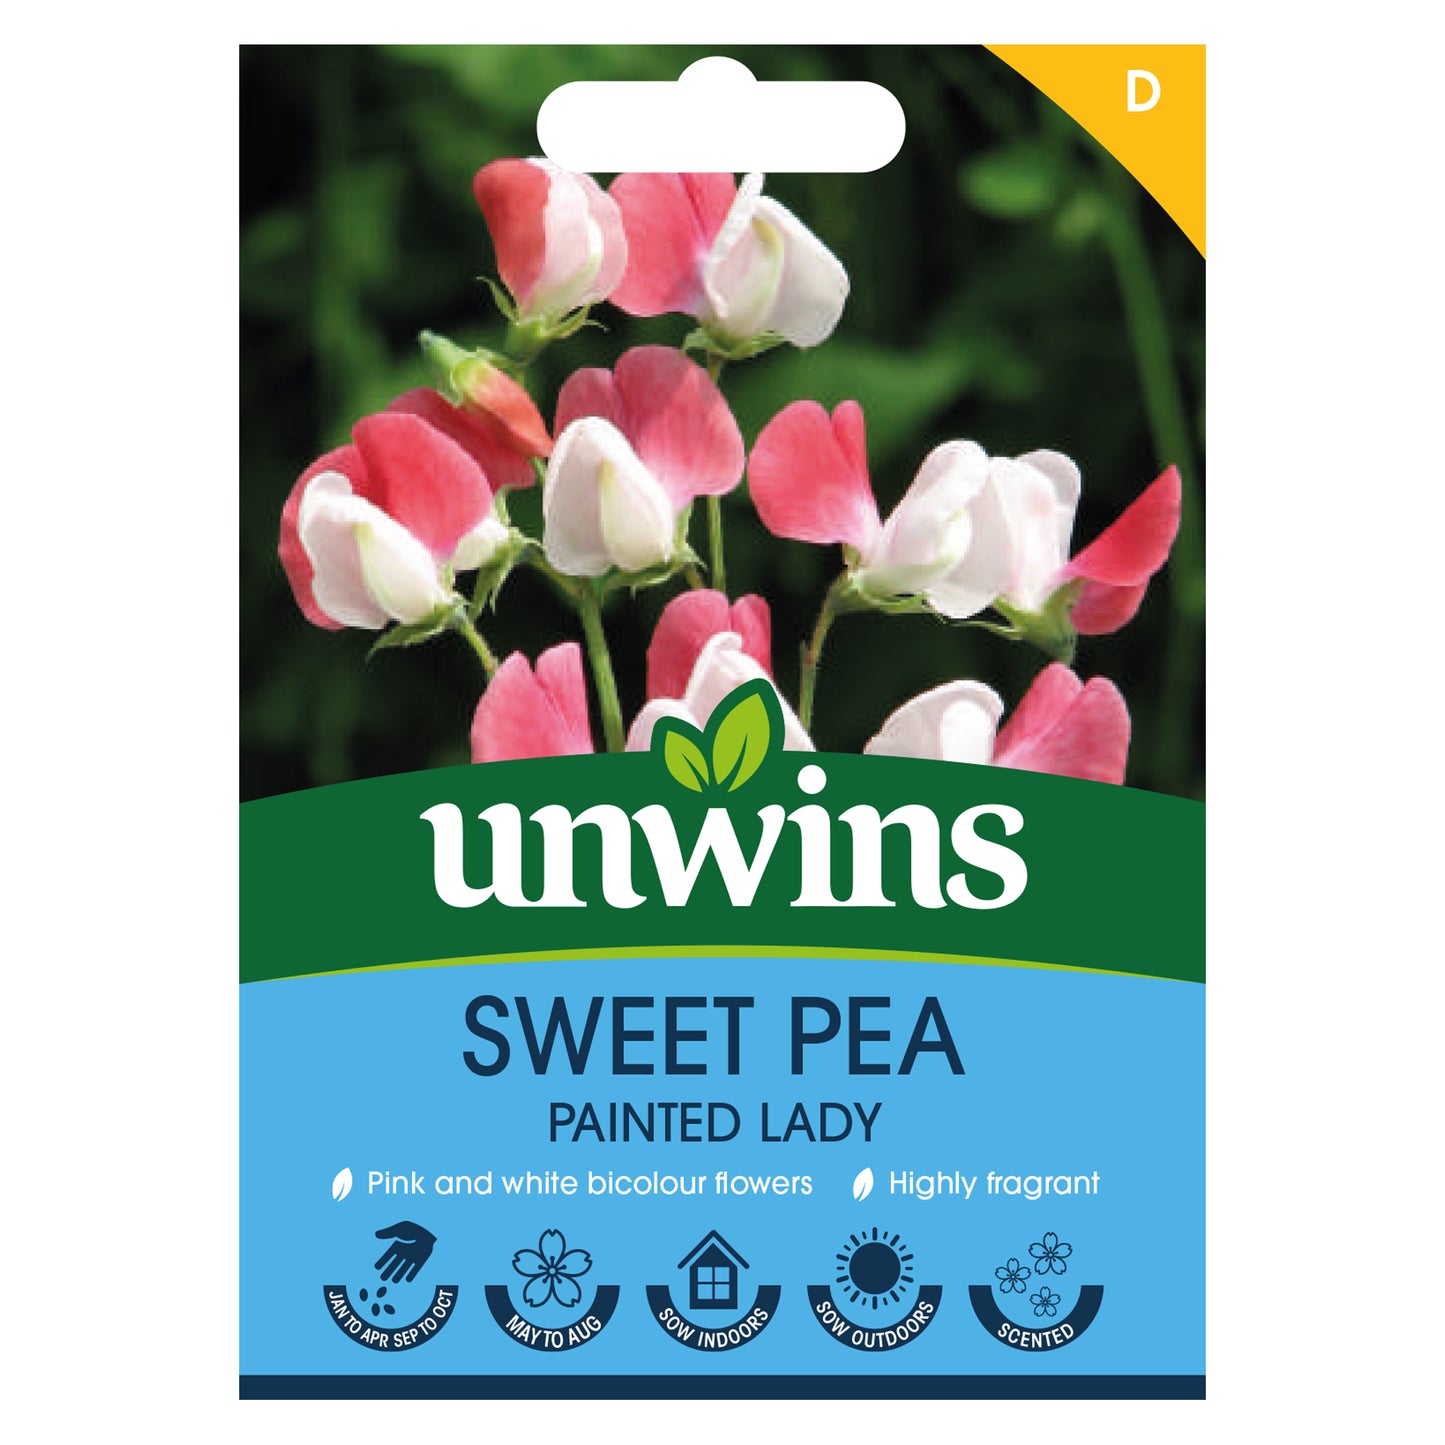 Unwins Sweet Pea Painted Lady Seeds front of pack